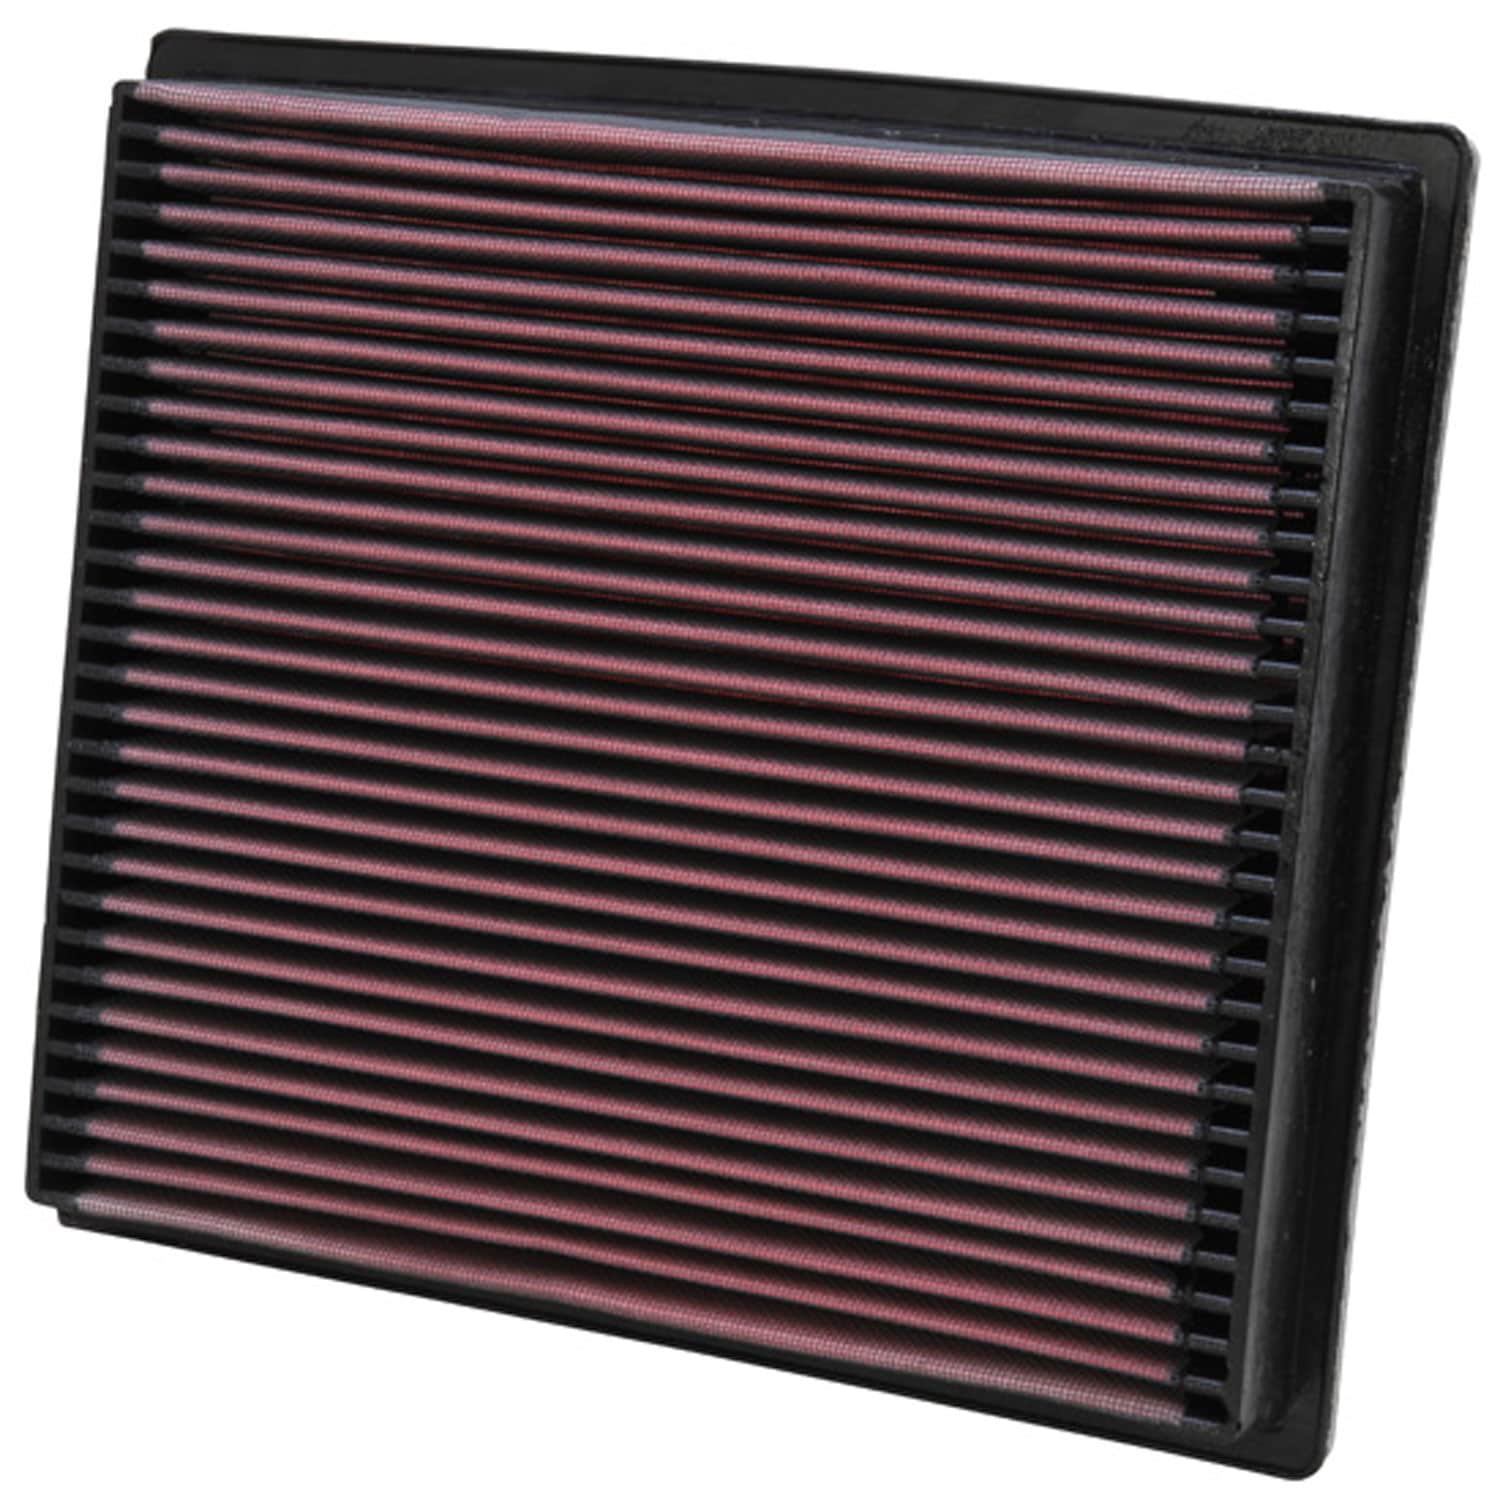 K&N K&n Engine Air Filter: High Performance, Premium, Washable, Replacement  Filter: 1994-2002 Dodge (ram 2500, Ram 3500), 33-2056 in the Automotive  Hardware department at